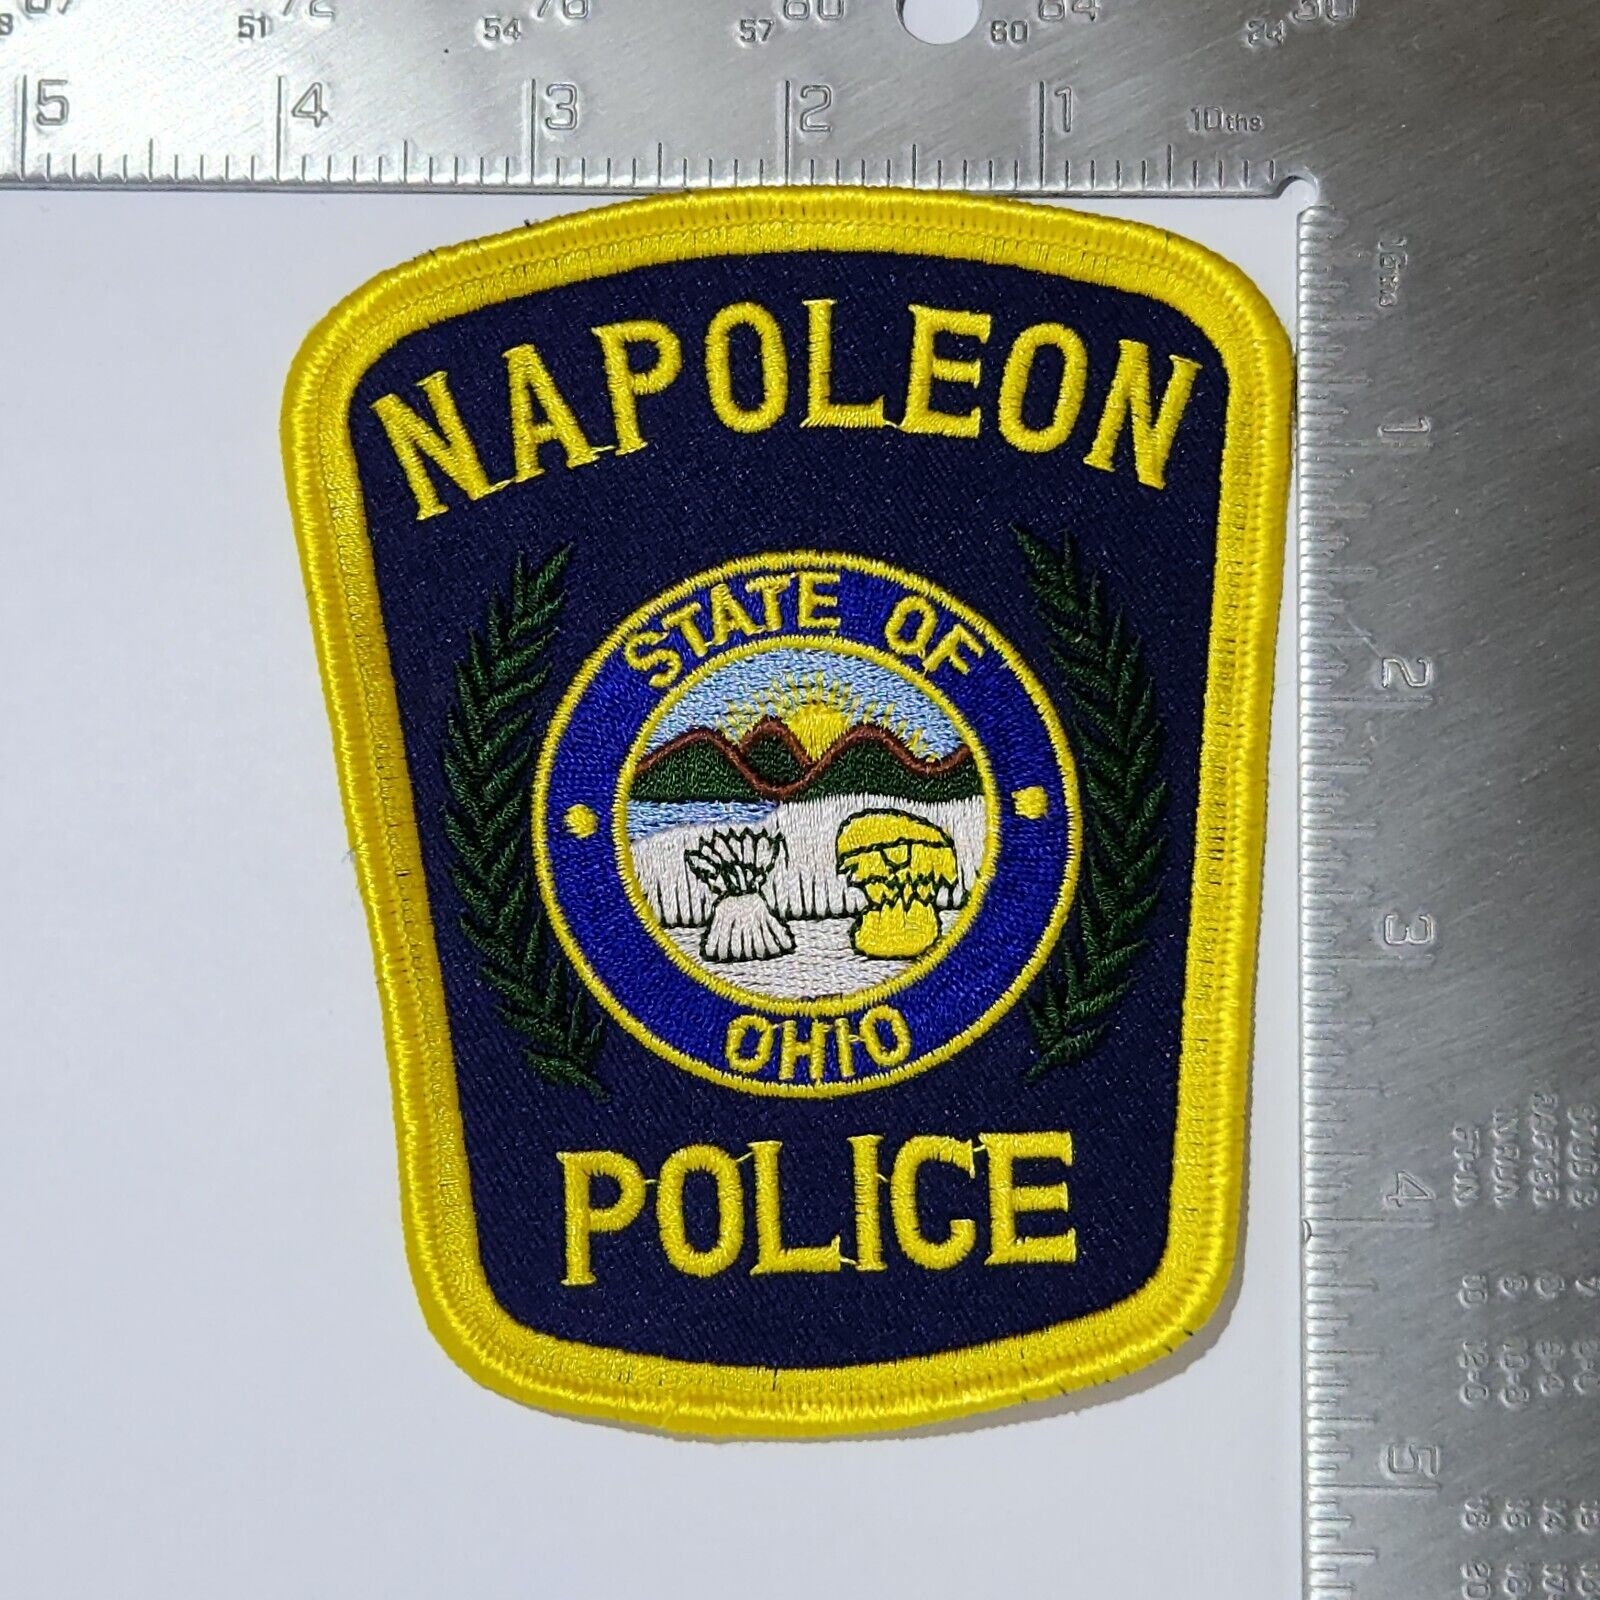 Napoleon Police Patch Ohio OH. 4x5 Inches. Great Condition